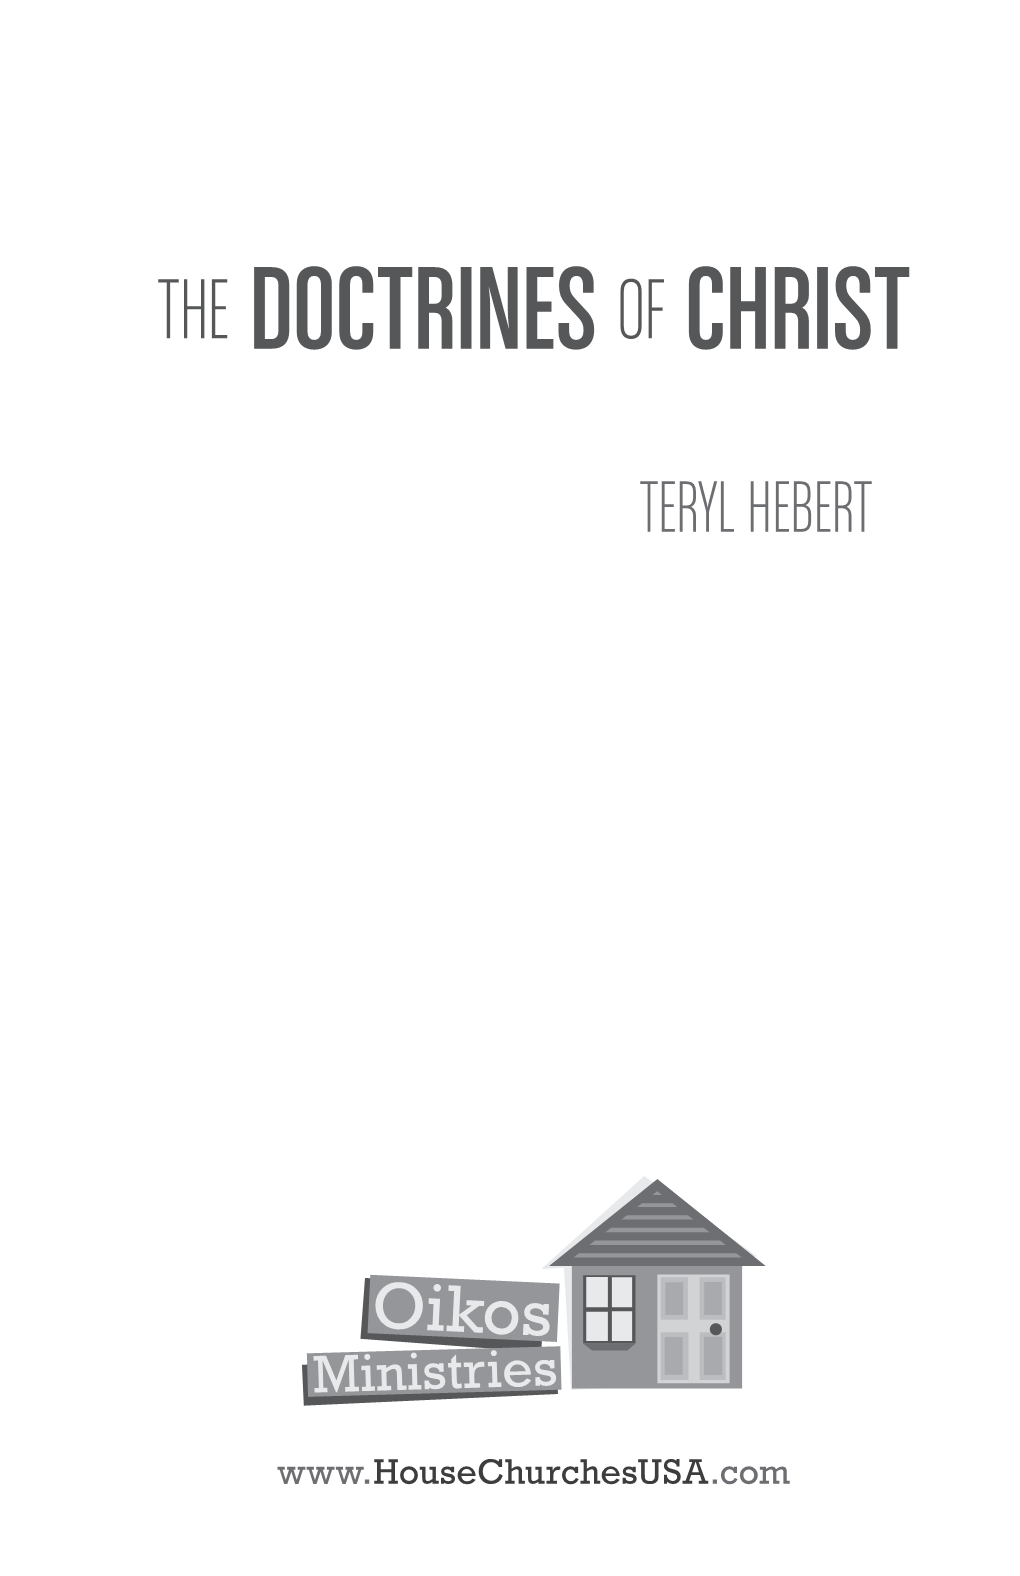 The Doctrines of Christ